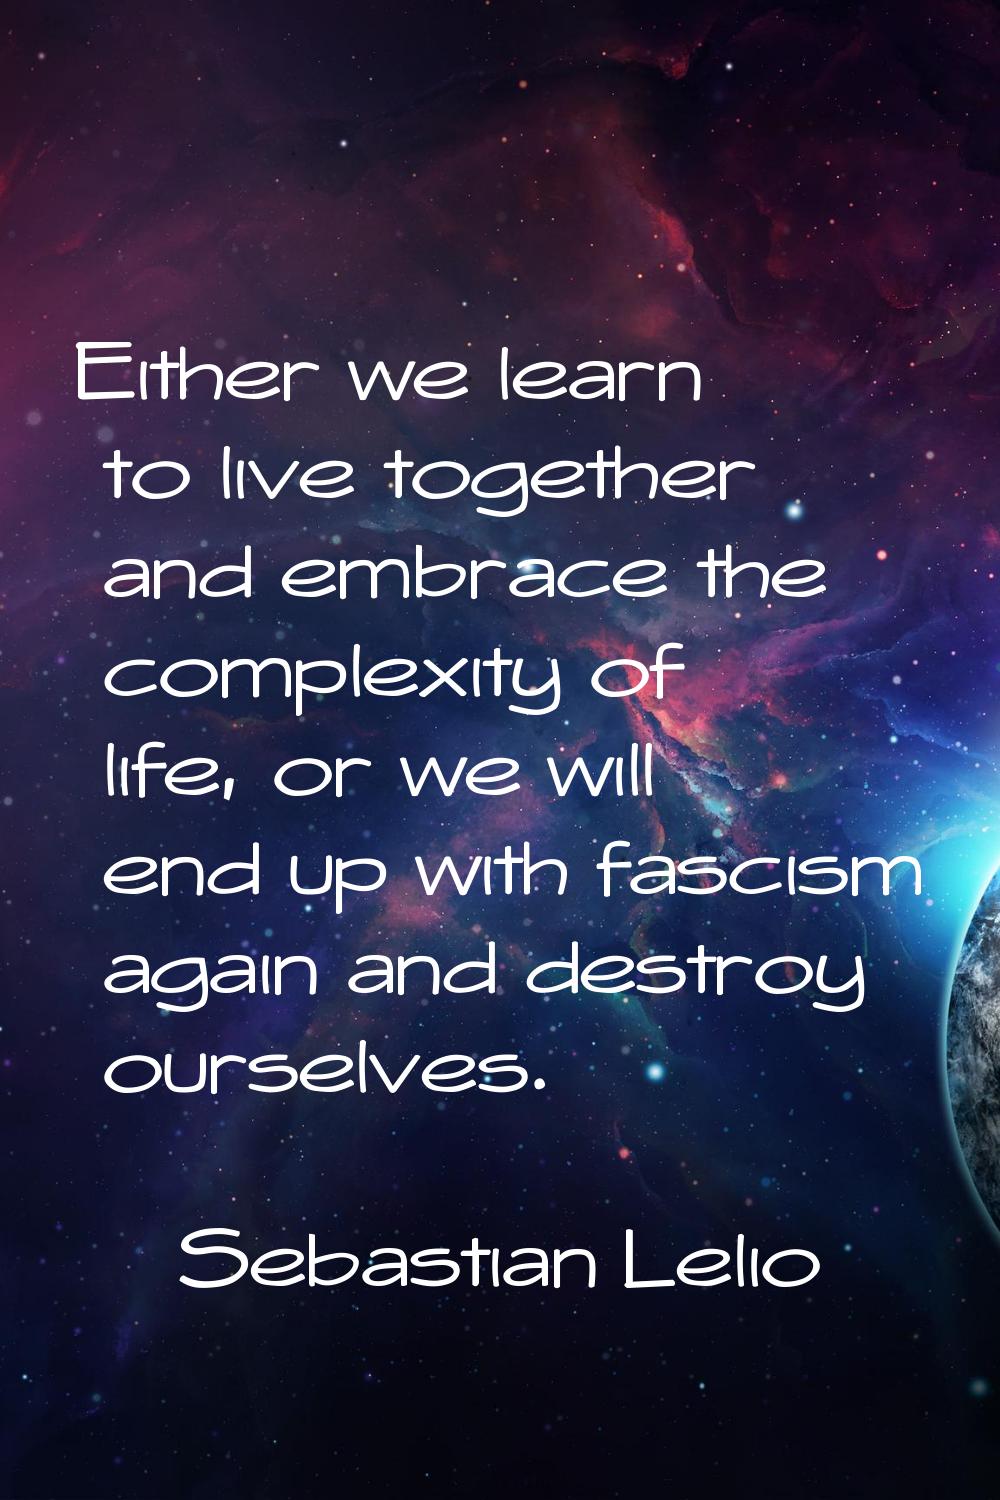 Either we learn to live together and embrace the complexity of life, or we will end up with fascism